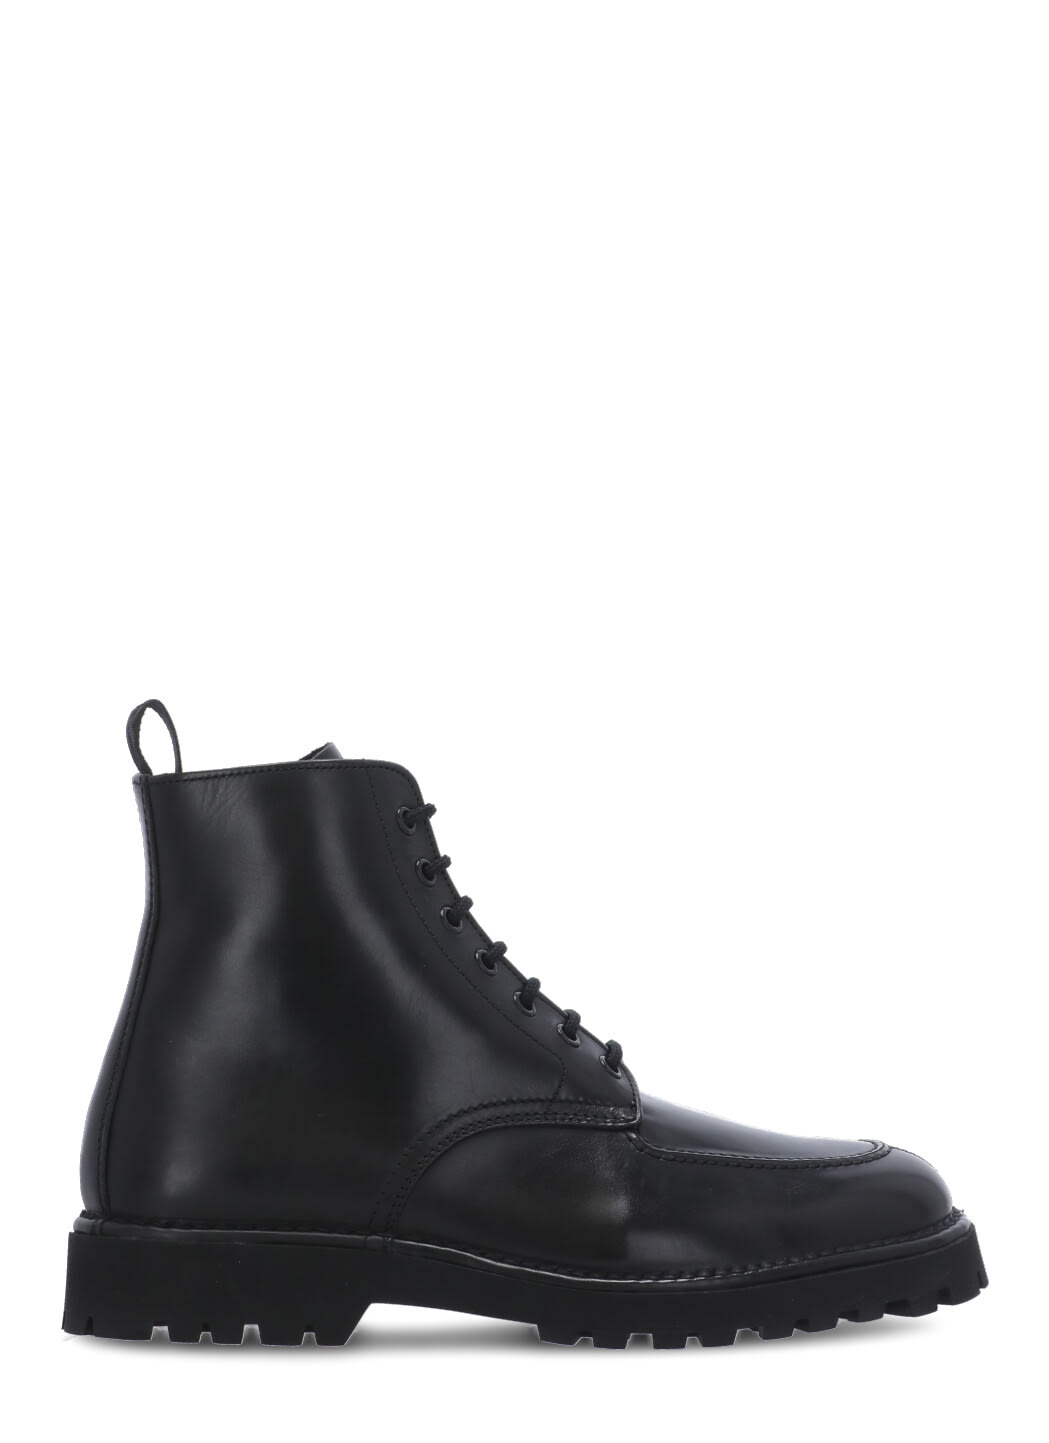 Kenzo K-mount Laced Leather Ankle Boots